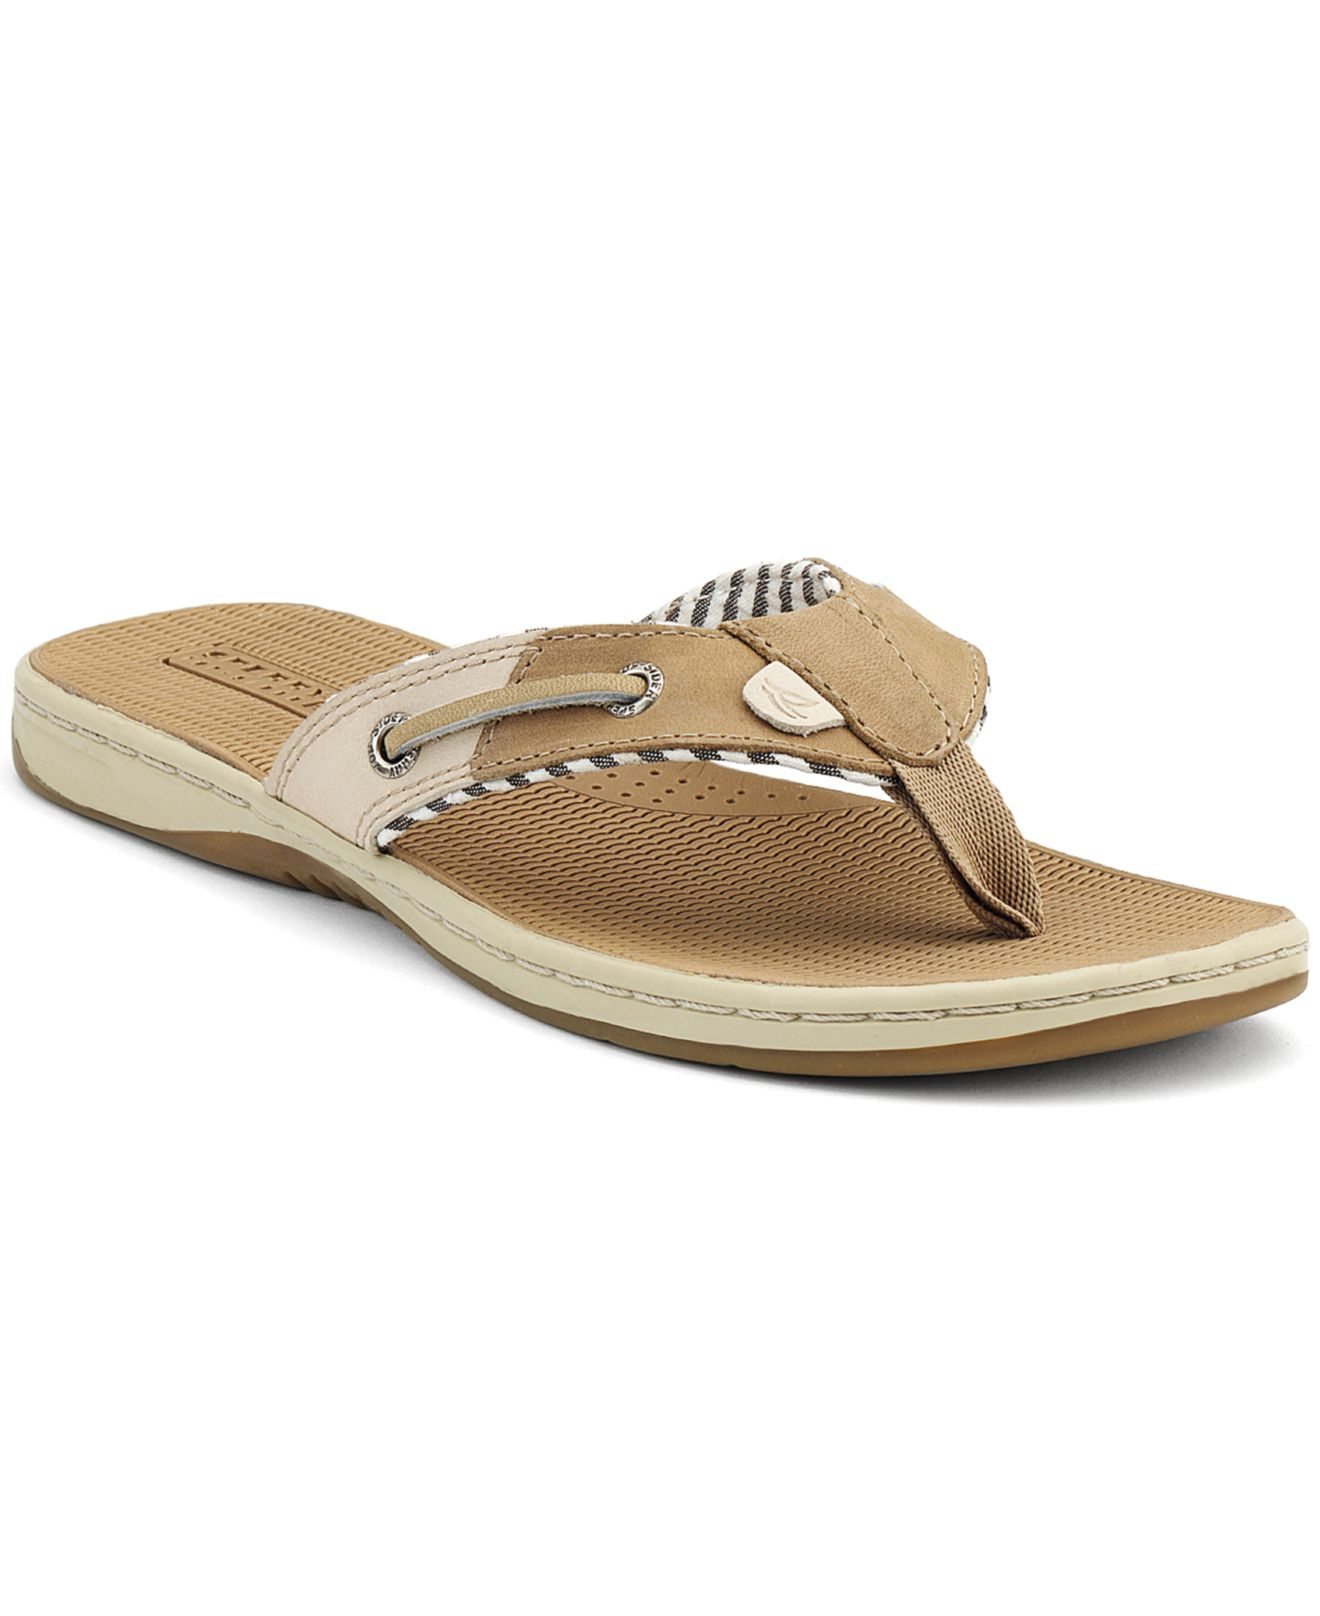 Sperry Top-Sider Sperry Women'S Seafish 